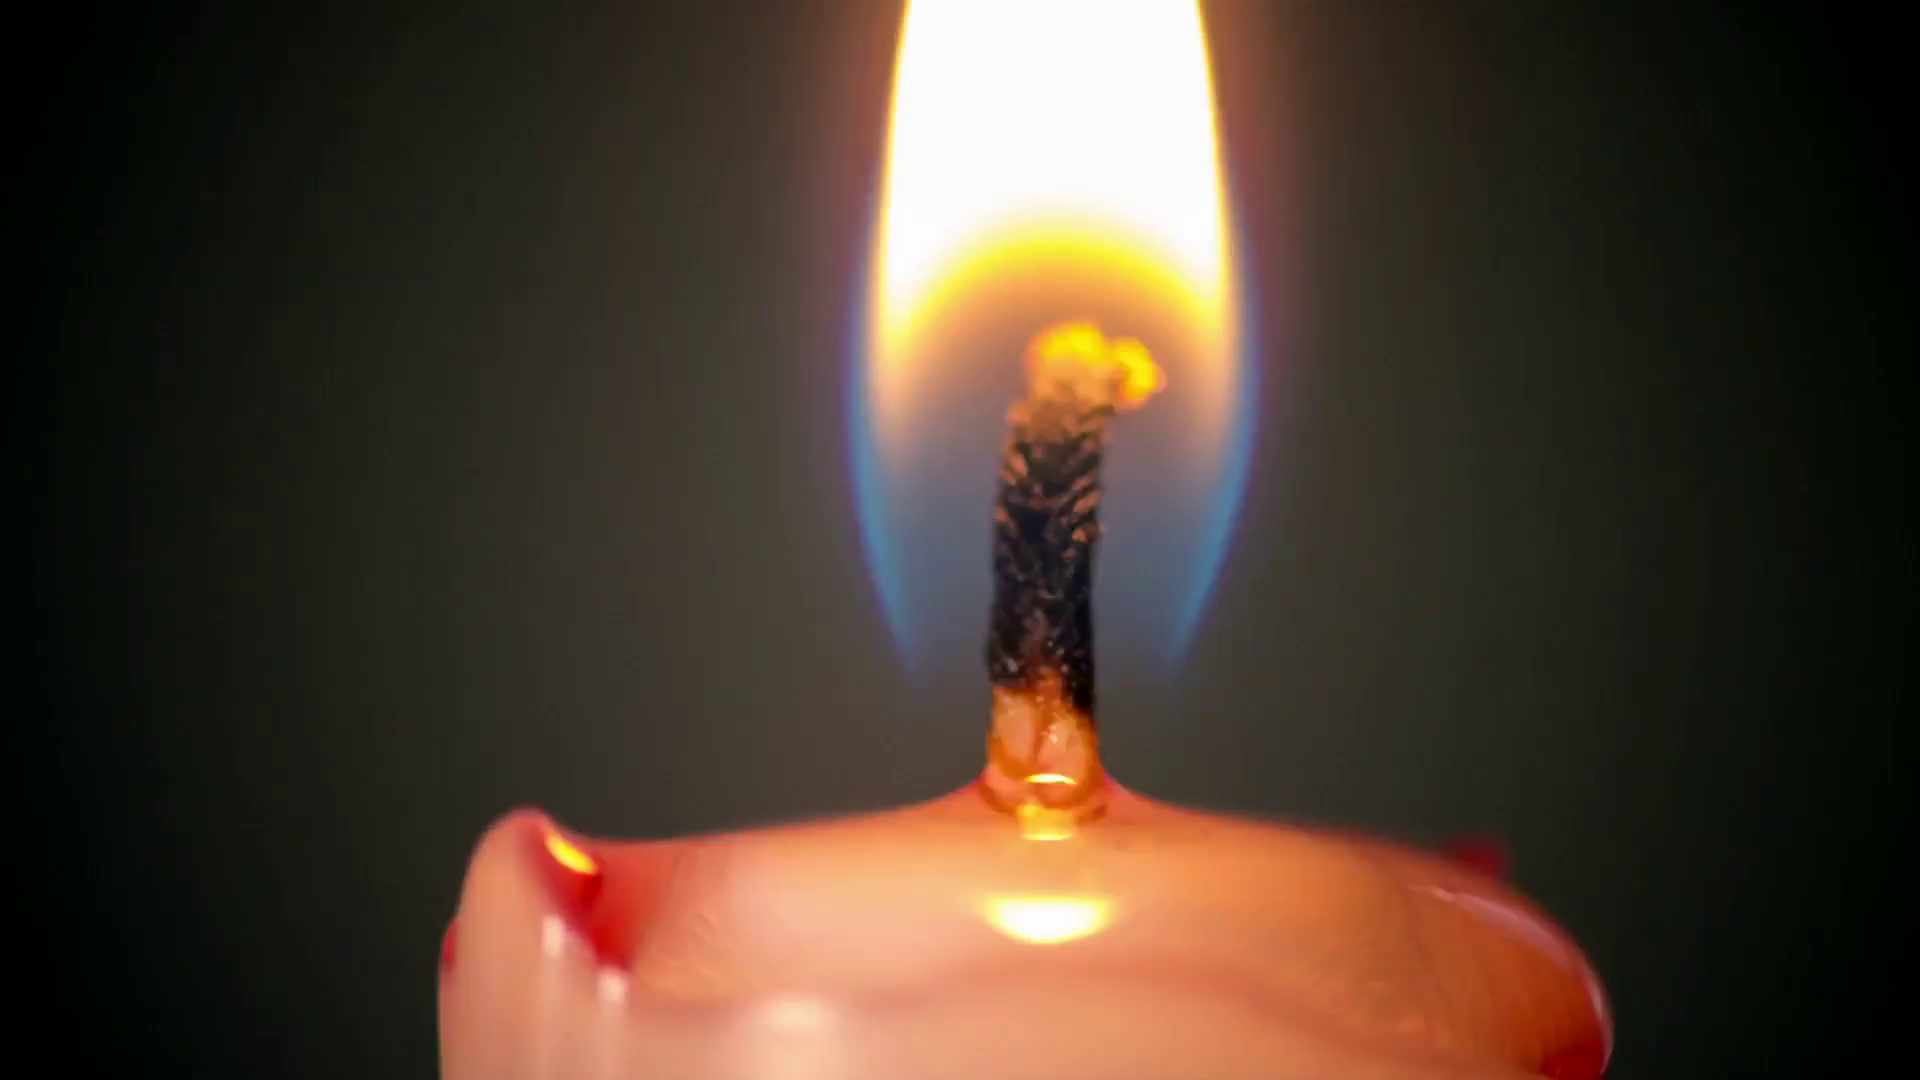 Time Lapse of Burning Candle 